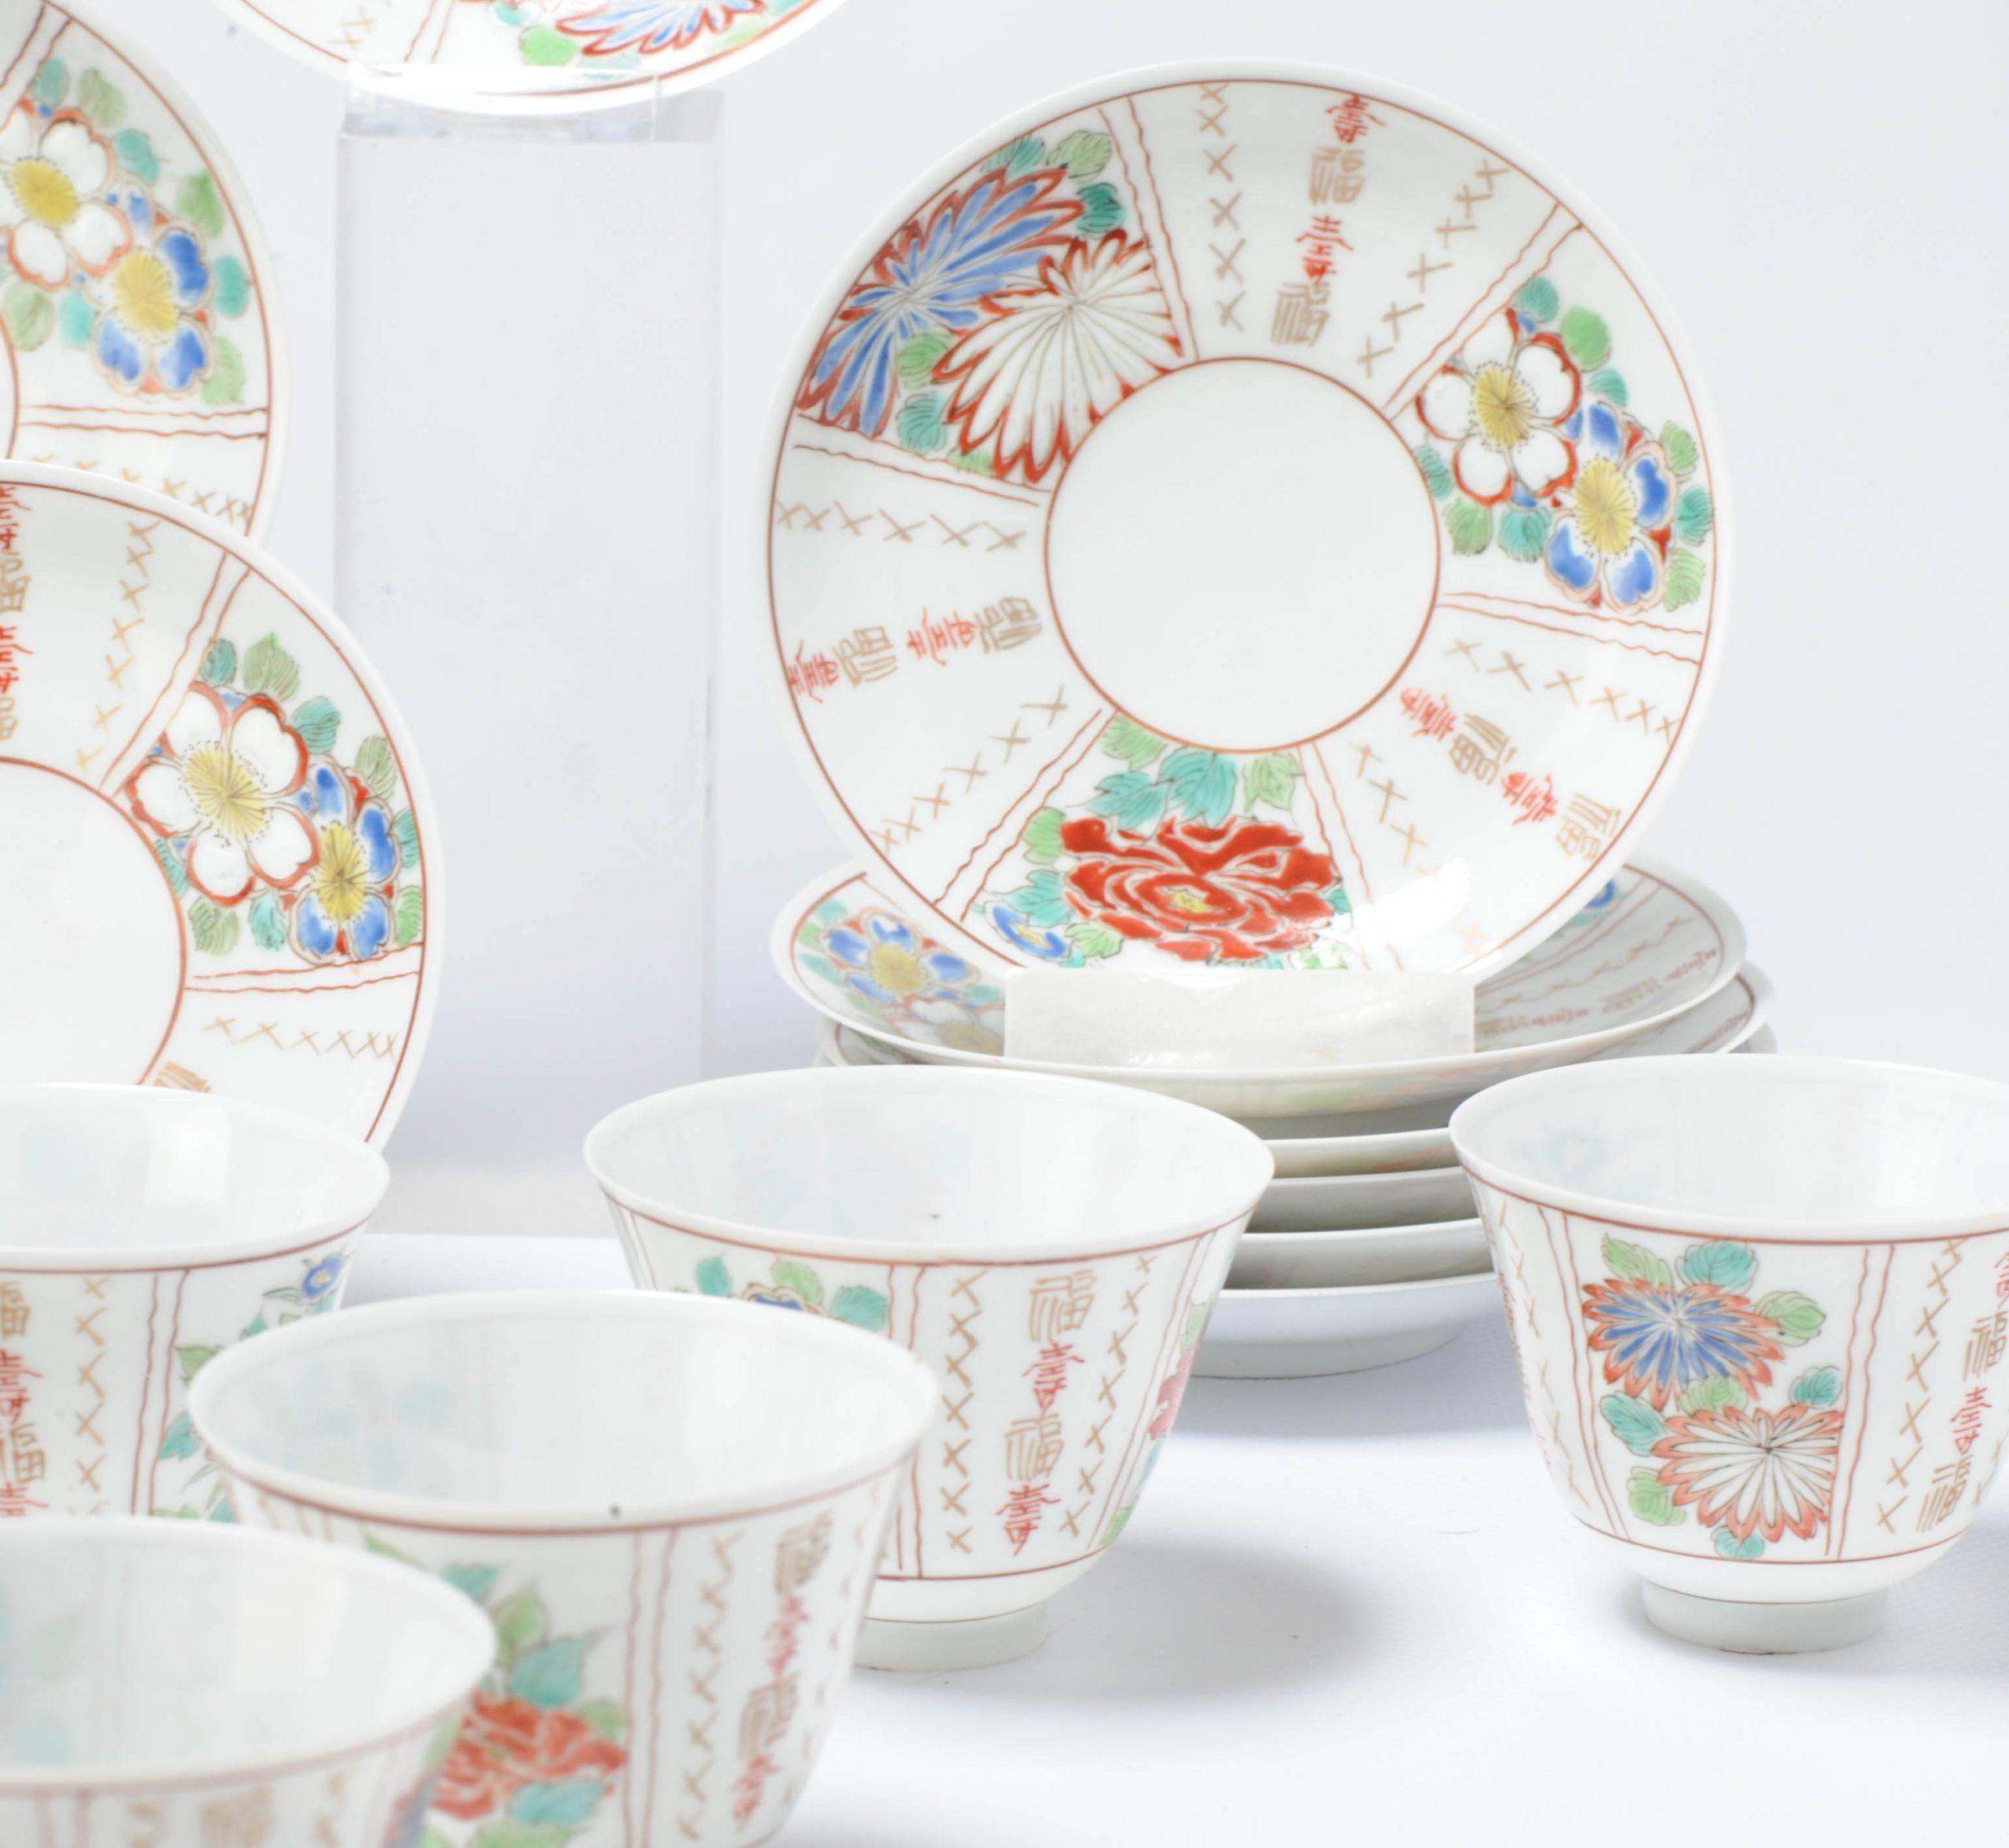 A very nice set of 12 bowls decorated. They are marked on the base.

Additional information:
Material: Porcelain & Pottery
Region of Origin: Japan
Period: 19th century, 20th century Meiji Periode (1867-1912)
Age: Pre-1800
Condition: 1 dish with